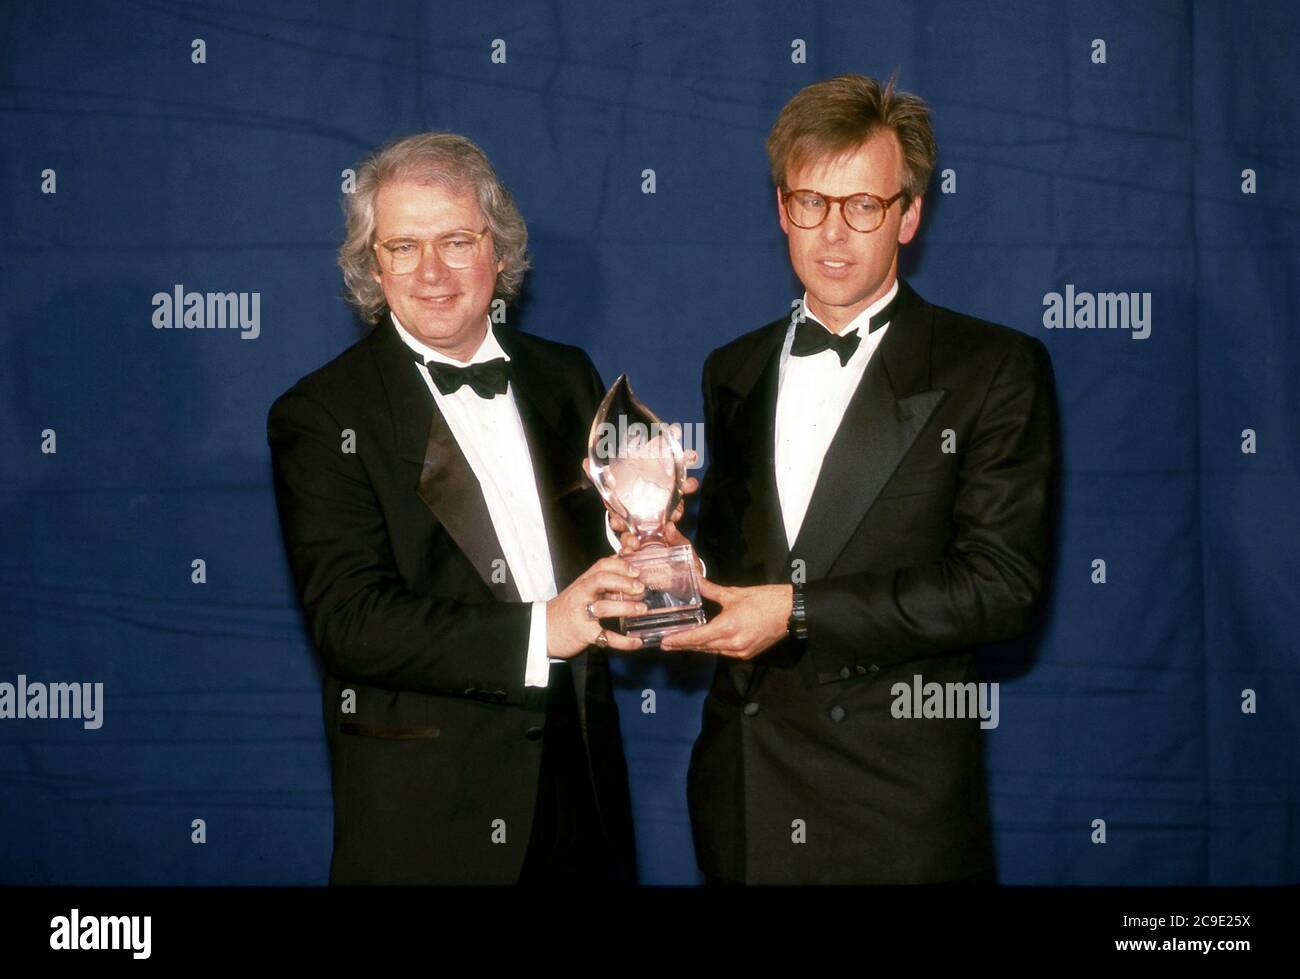 Director Barry Levinson (left) and producing partner receiving a People's Choice award in. Los Angeles, CA Stock Photo